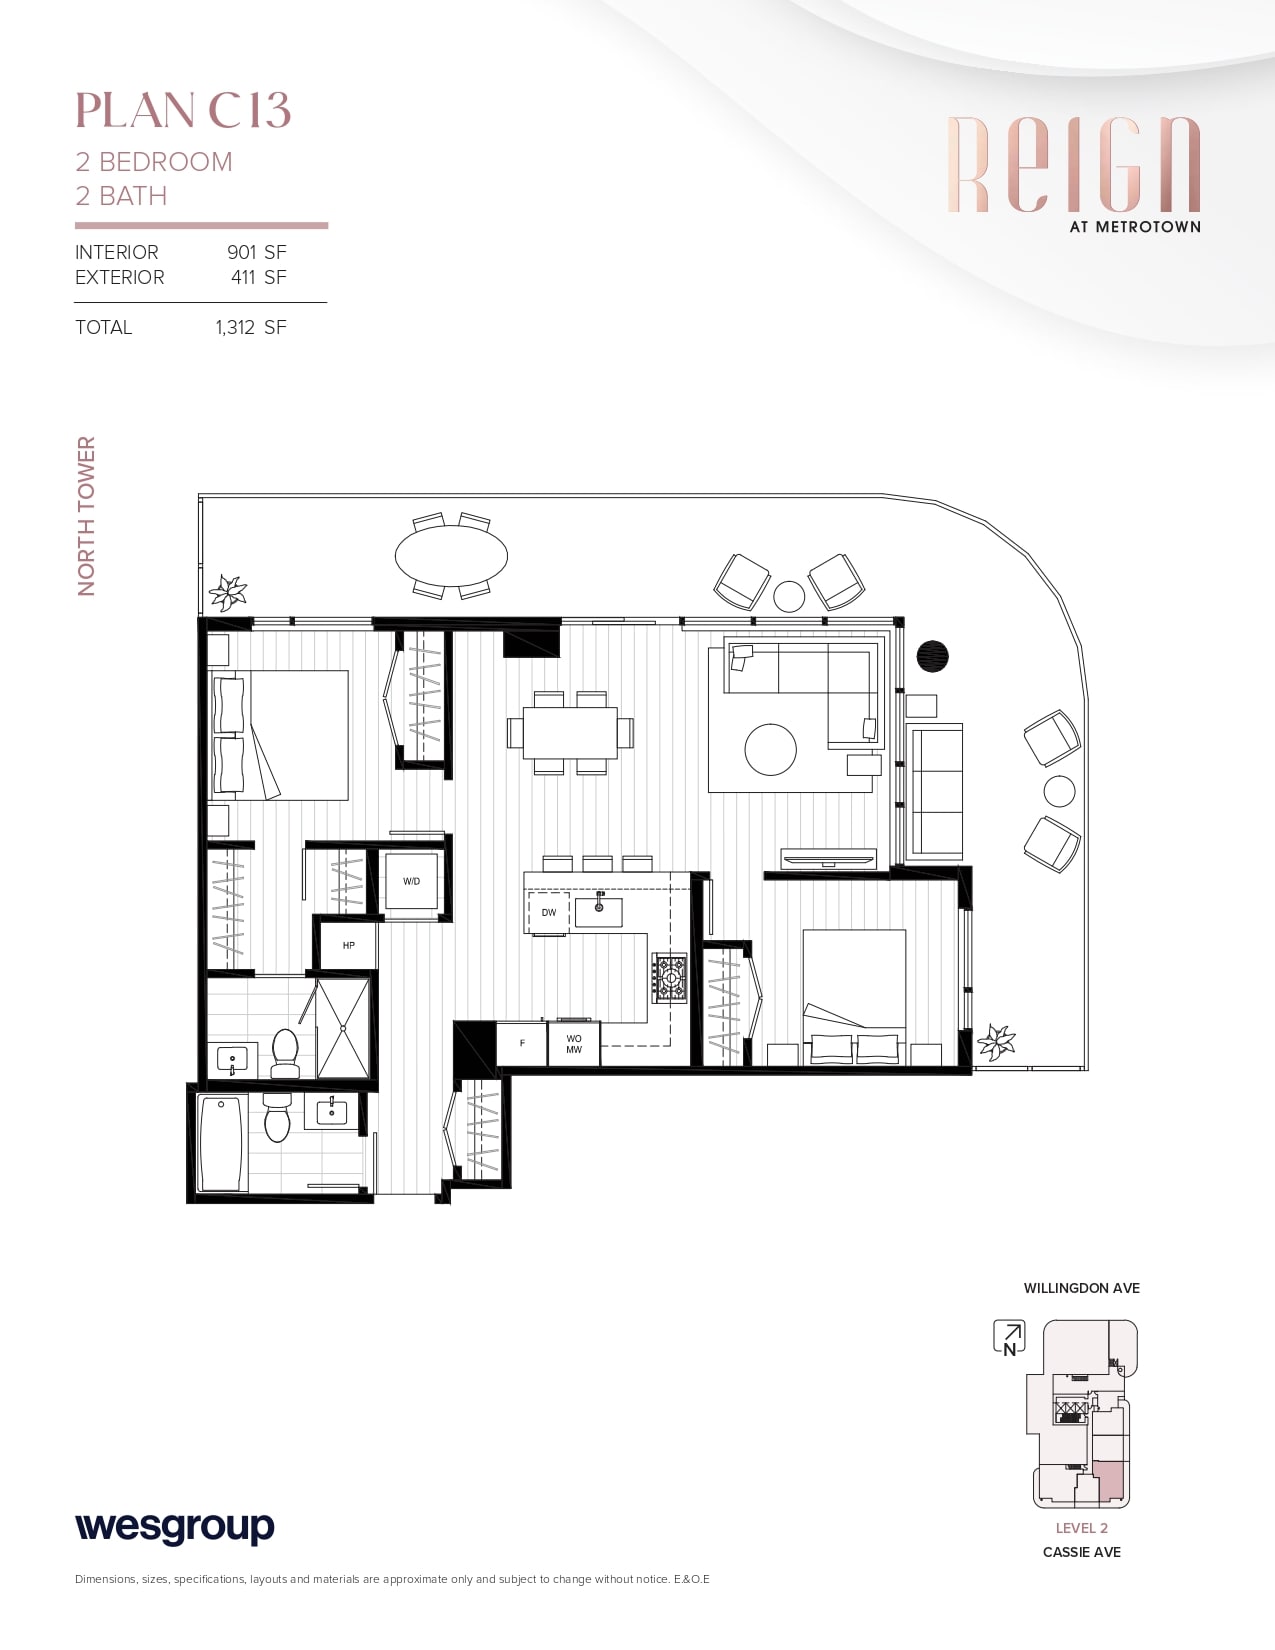 Reign_-_North_Tower_-_Typical_Floorplans_-_FINAL__page-0018-min.jpg